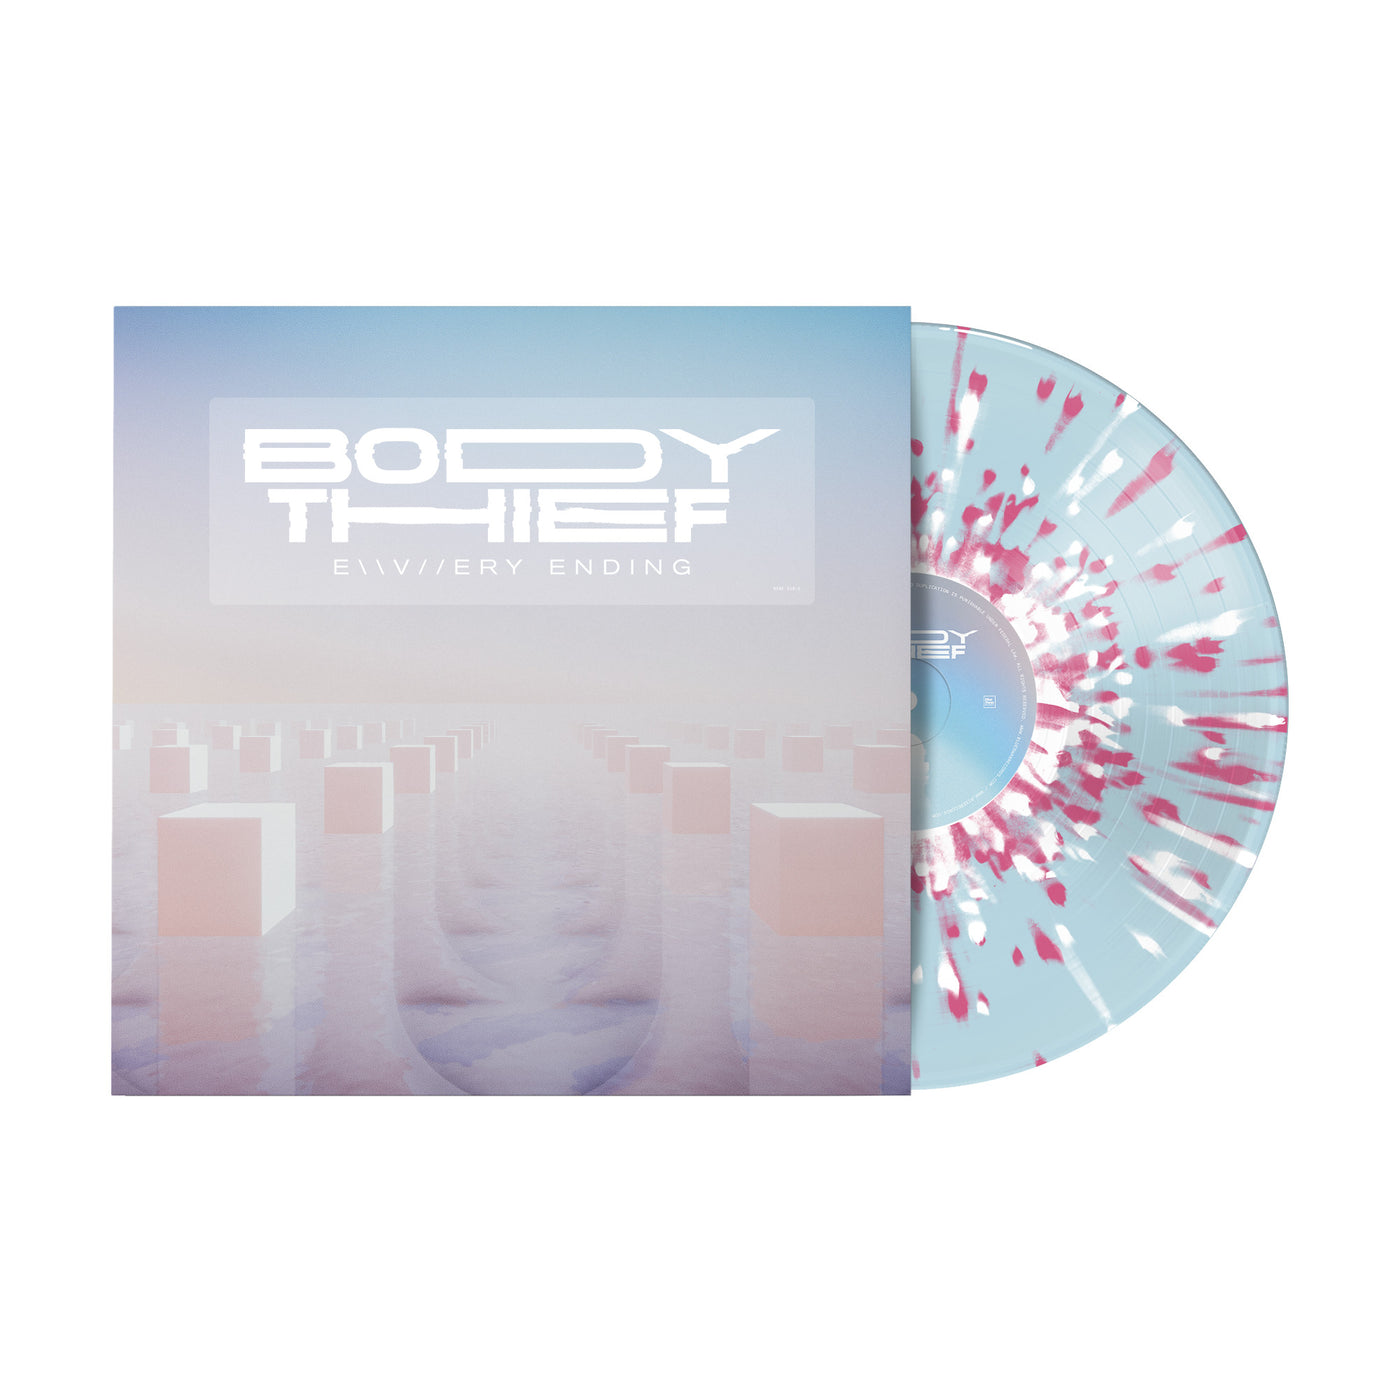 Body Thief Every Ending vinyl lp with vinyl exposed to show color. color of LP is blue with white and pink splatter. album art displays a series of pillar like structures in the middle of nowhere.